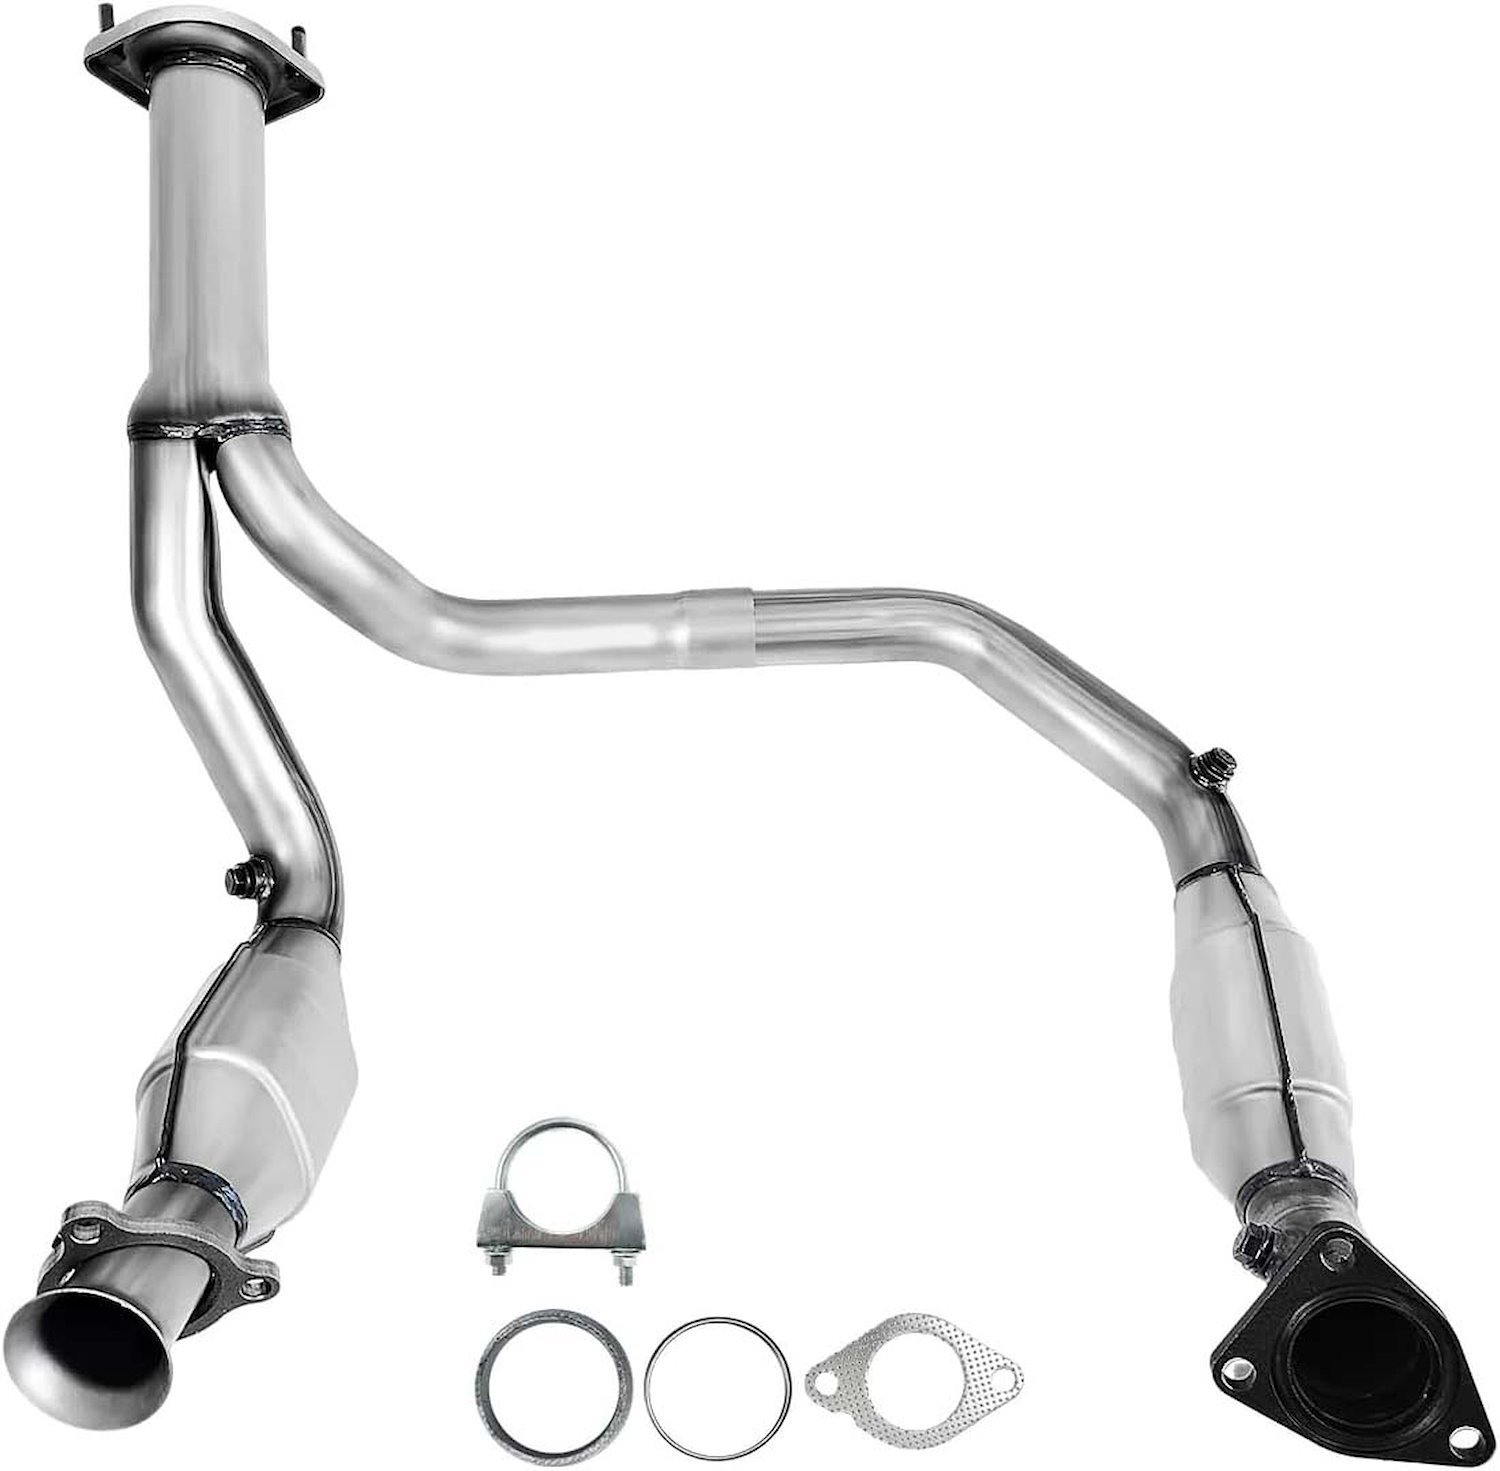 Catalytic Converter Fits 2009 Cadillac Escalade, Select 2007-2010 Chevy & GMC Truck & SUV Models w/4.8L, 5.3L & 6.0L V8 [Front]